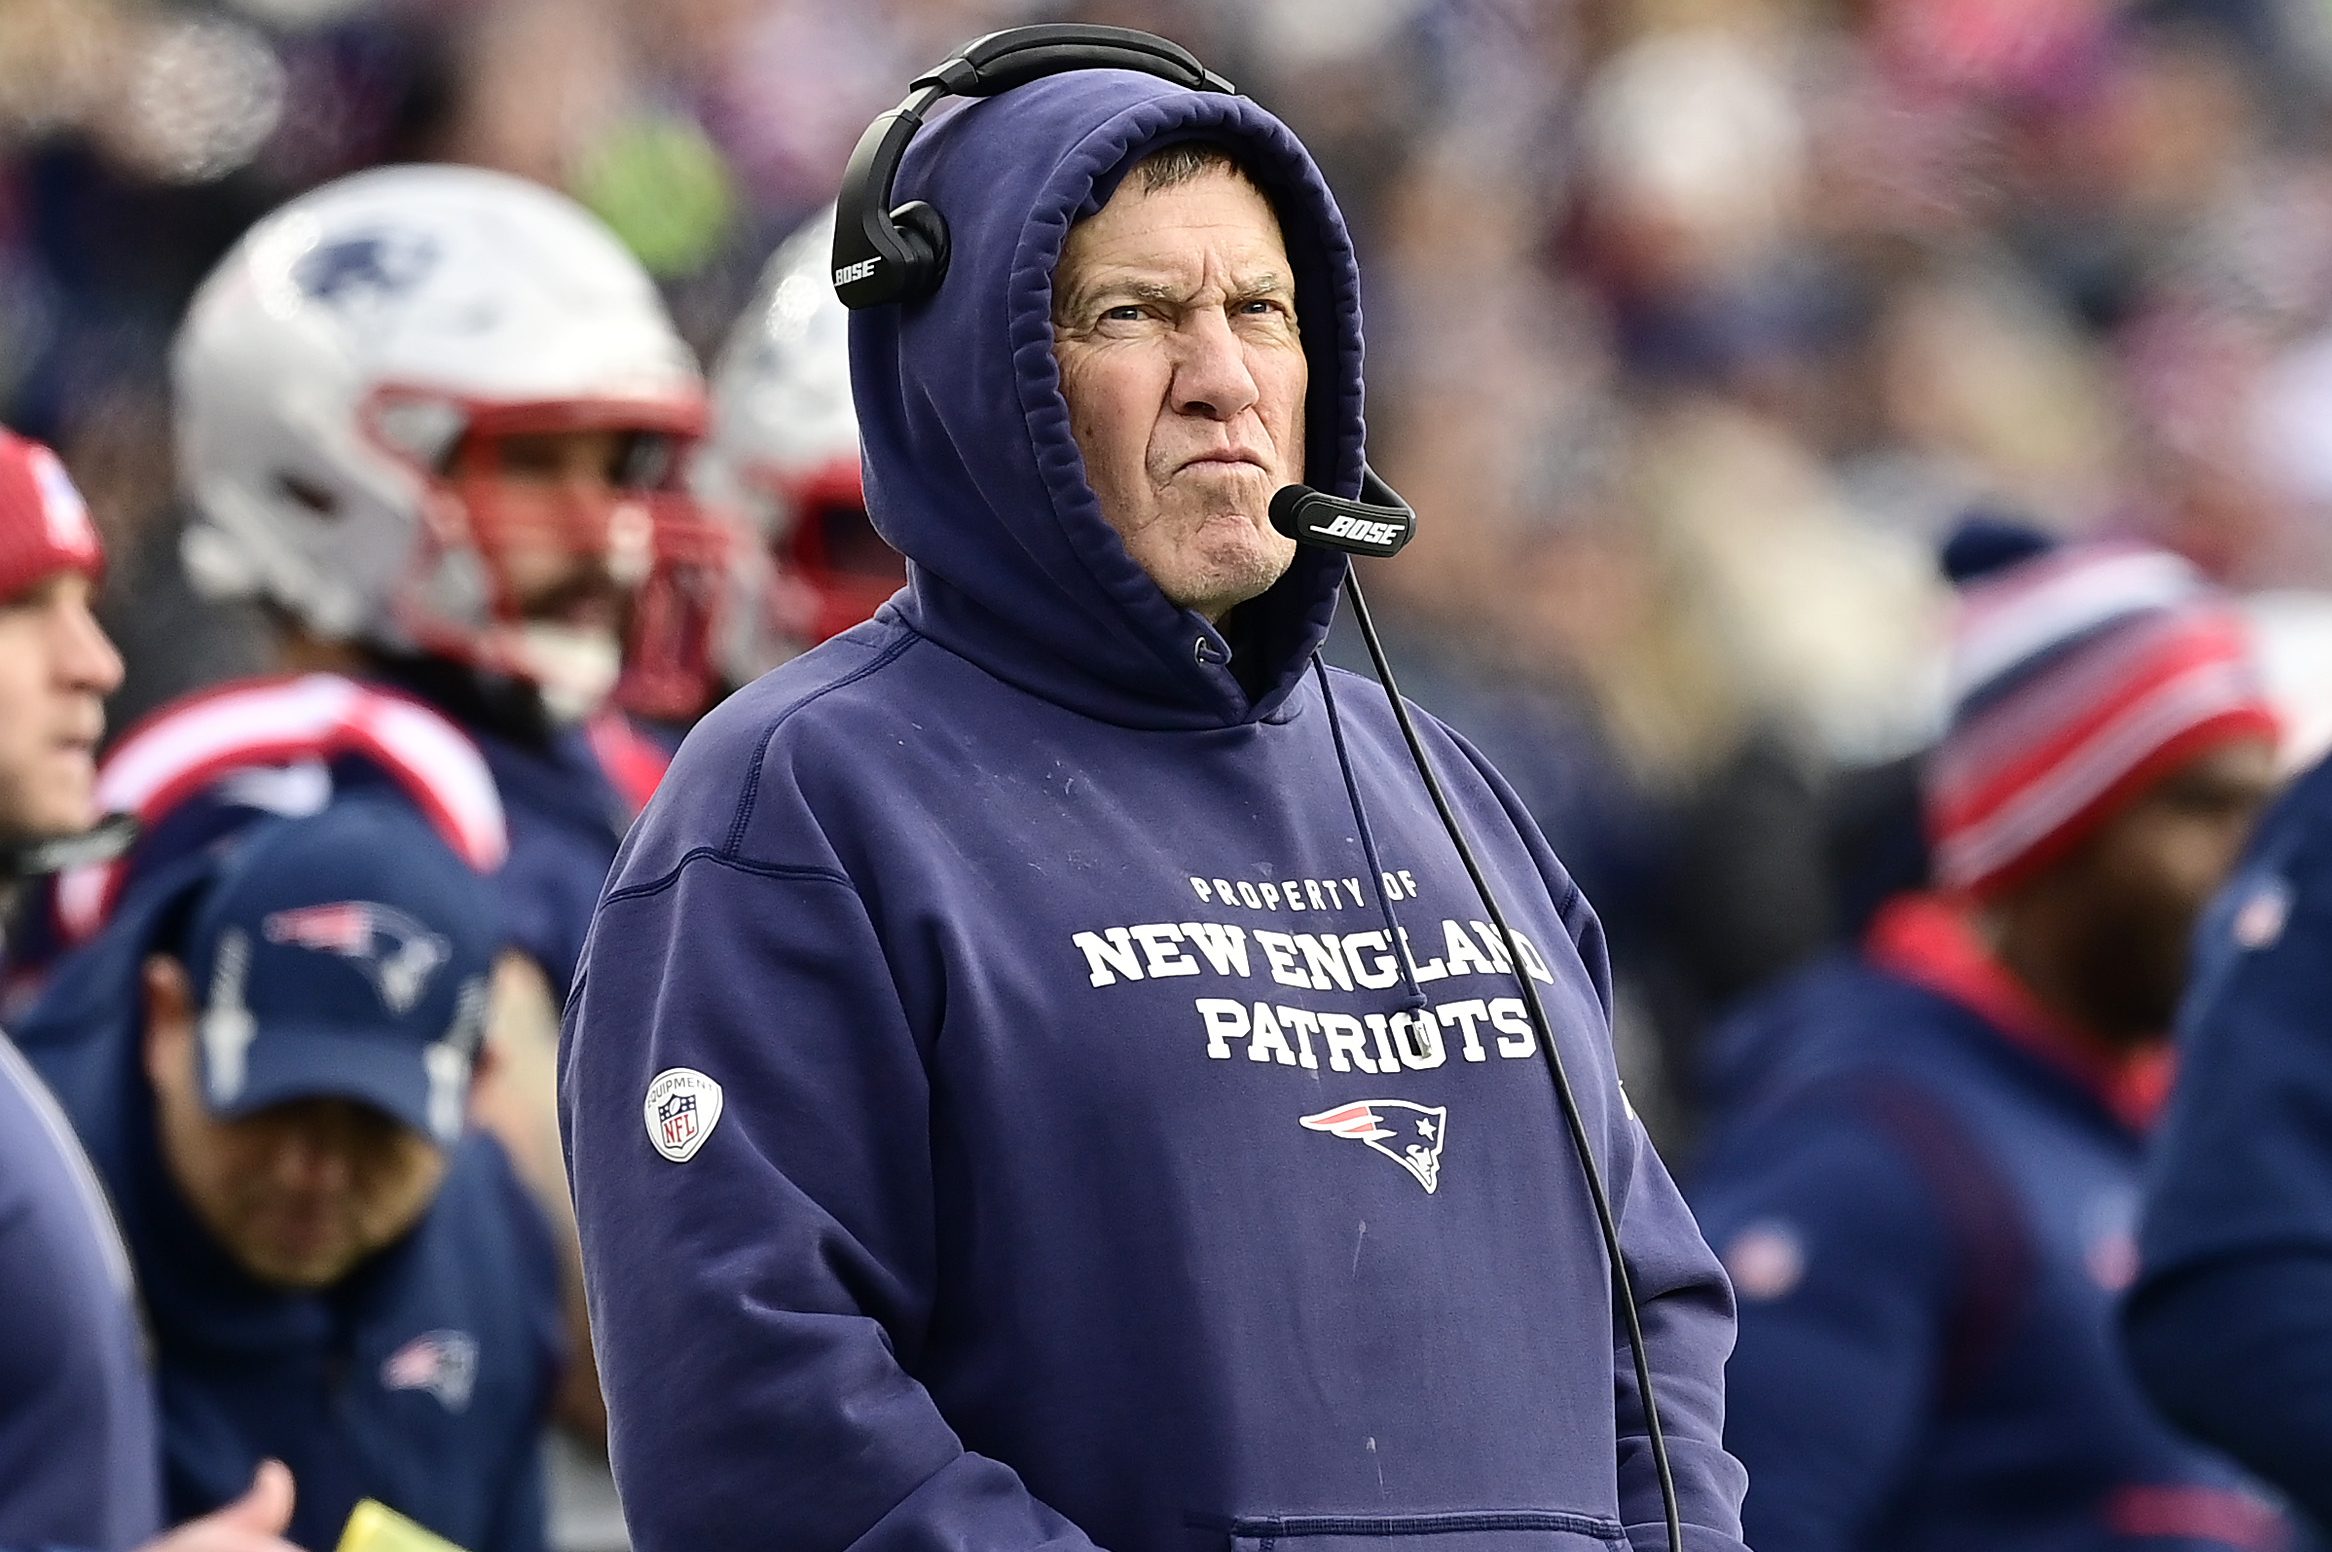 Head coach Bill Belichick of the New England Patriots looks on from the sidelines. A new survey looking at America's favorite sports coaches puts Belichick at the top.